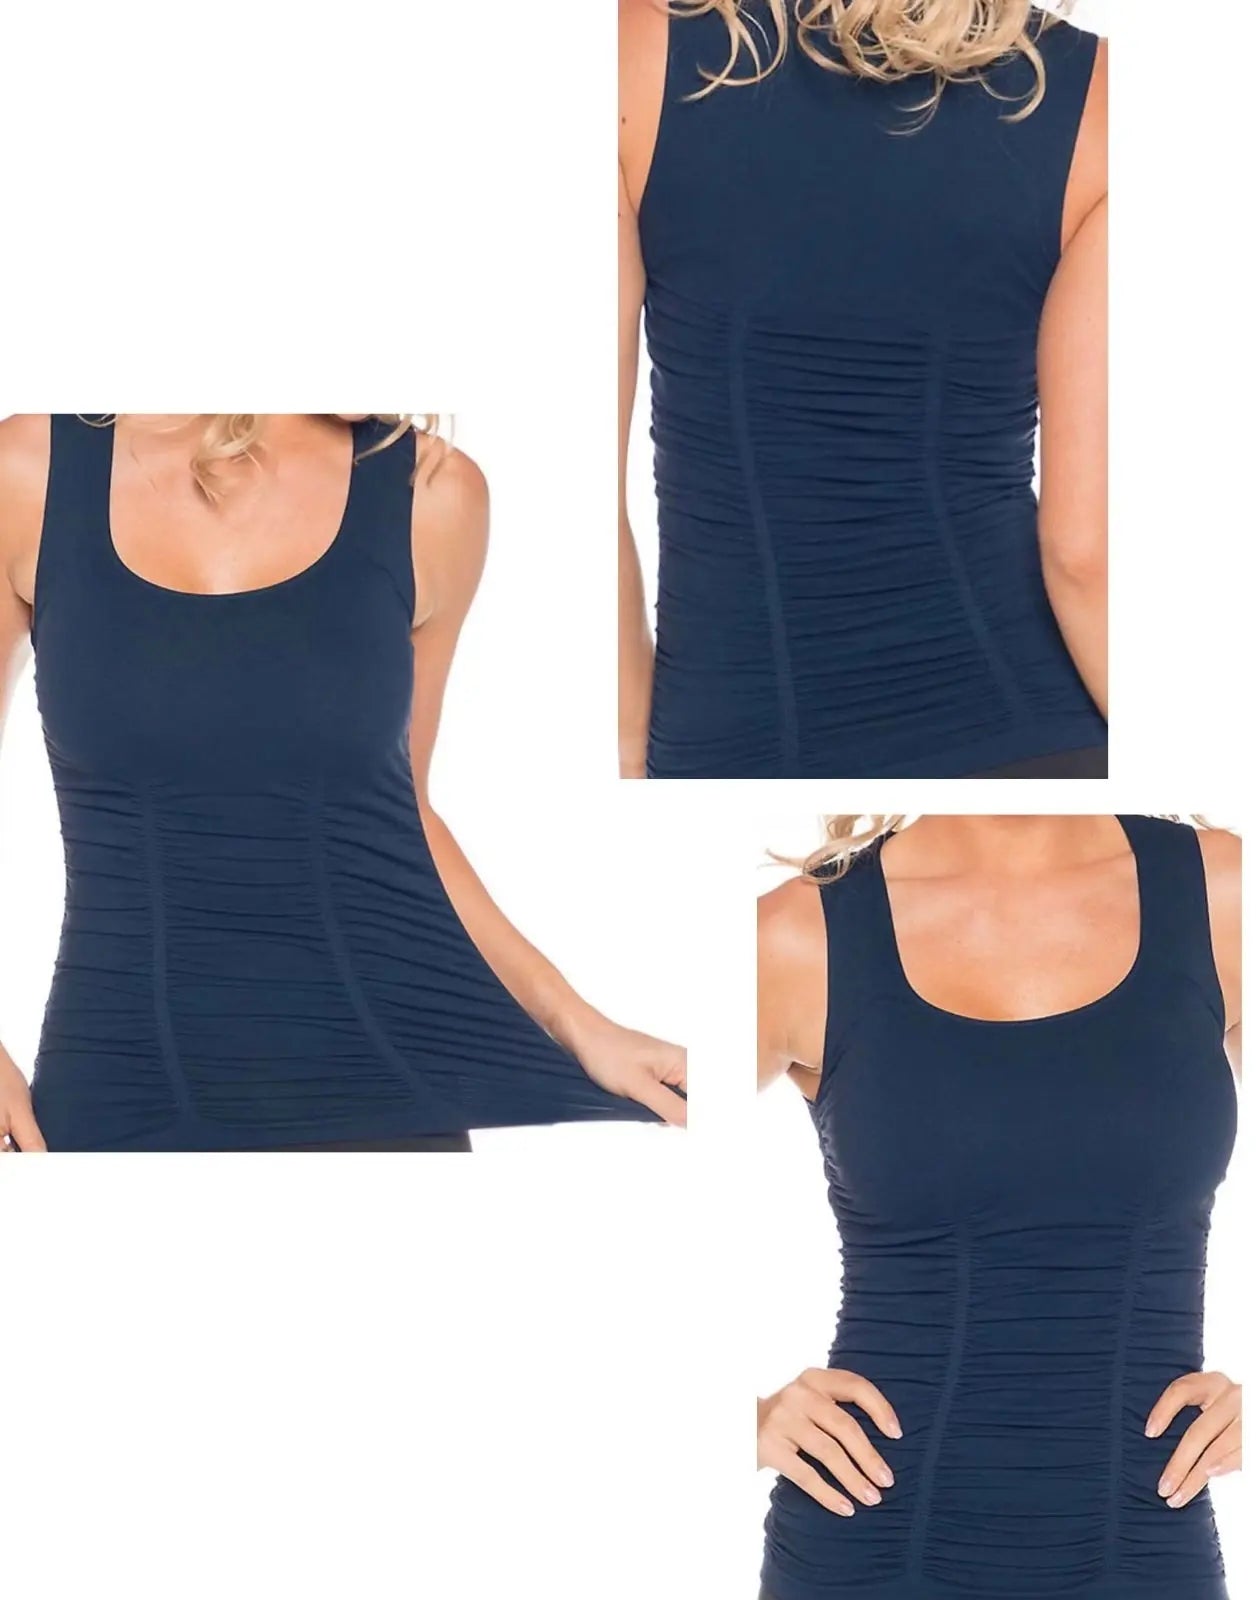 Ruched Tank in Navy online- Runway Athletics. This Tank is a must for ultra-flattering lightweight wear on and off the court.